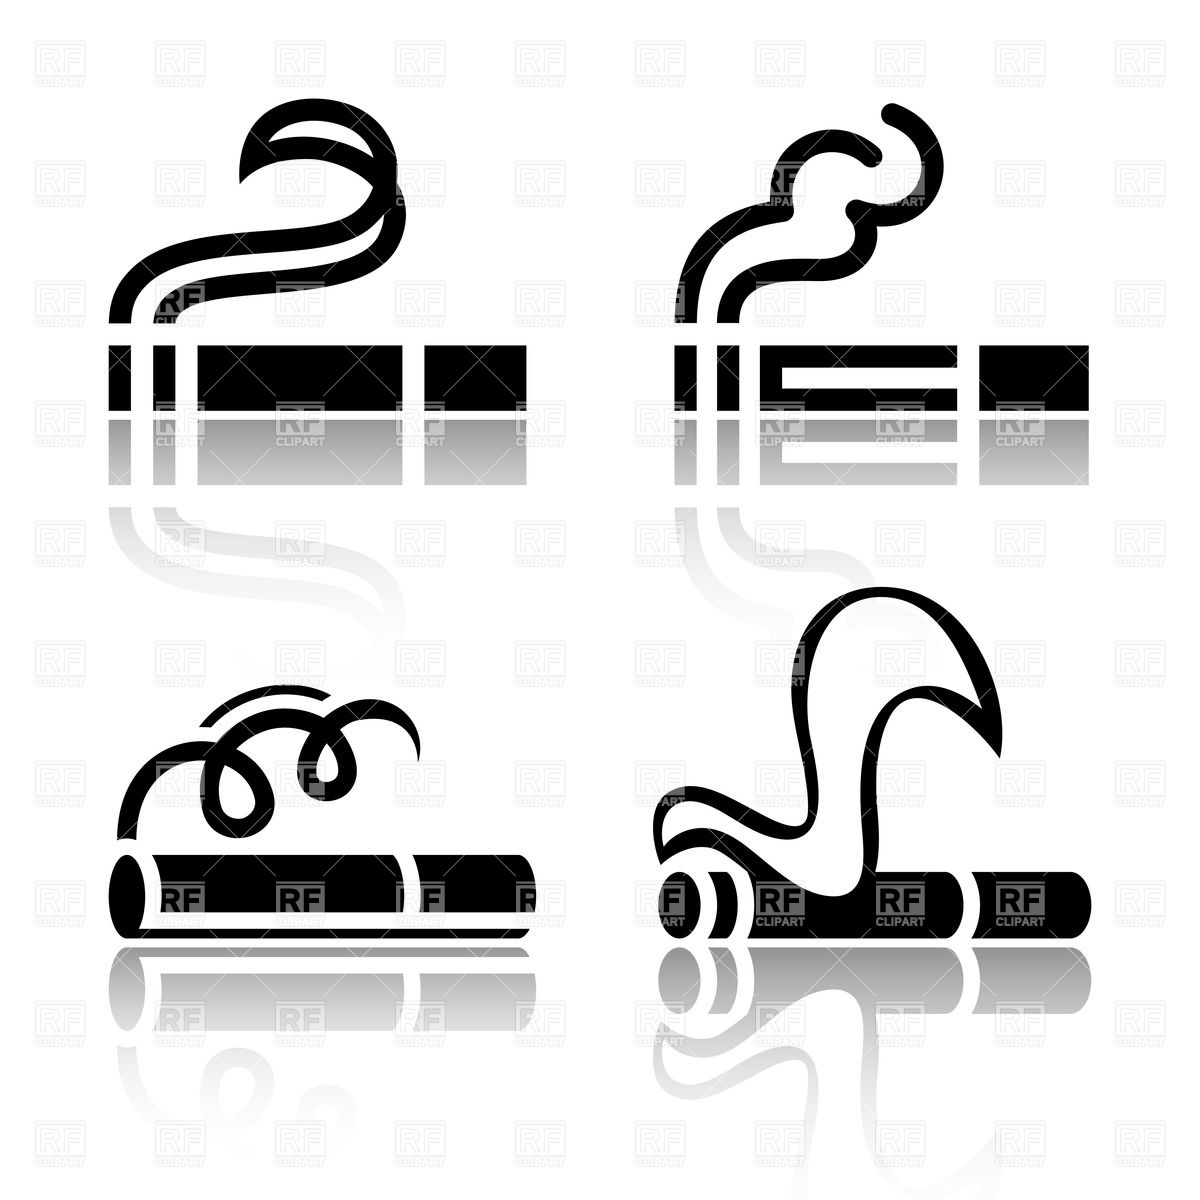 Simple Cigarette Icons 18088 Icons And Emblems Download Royalty